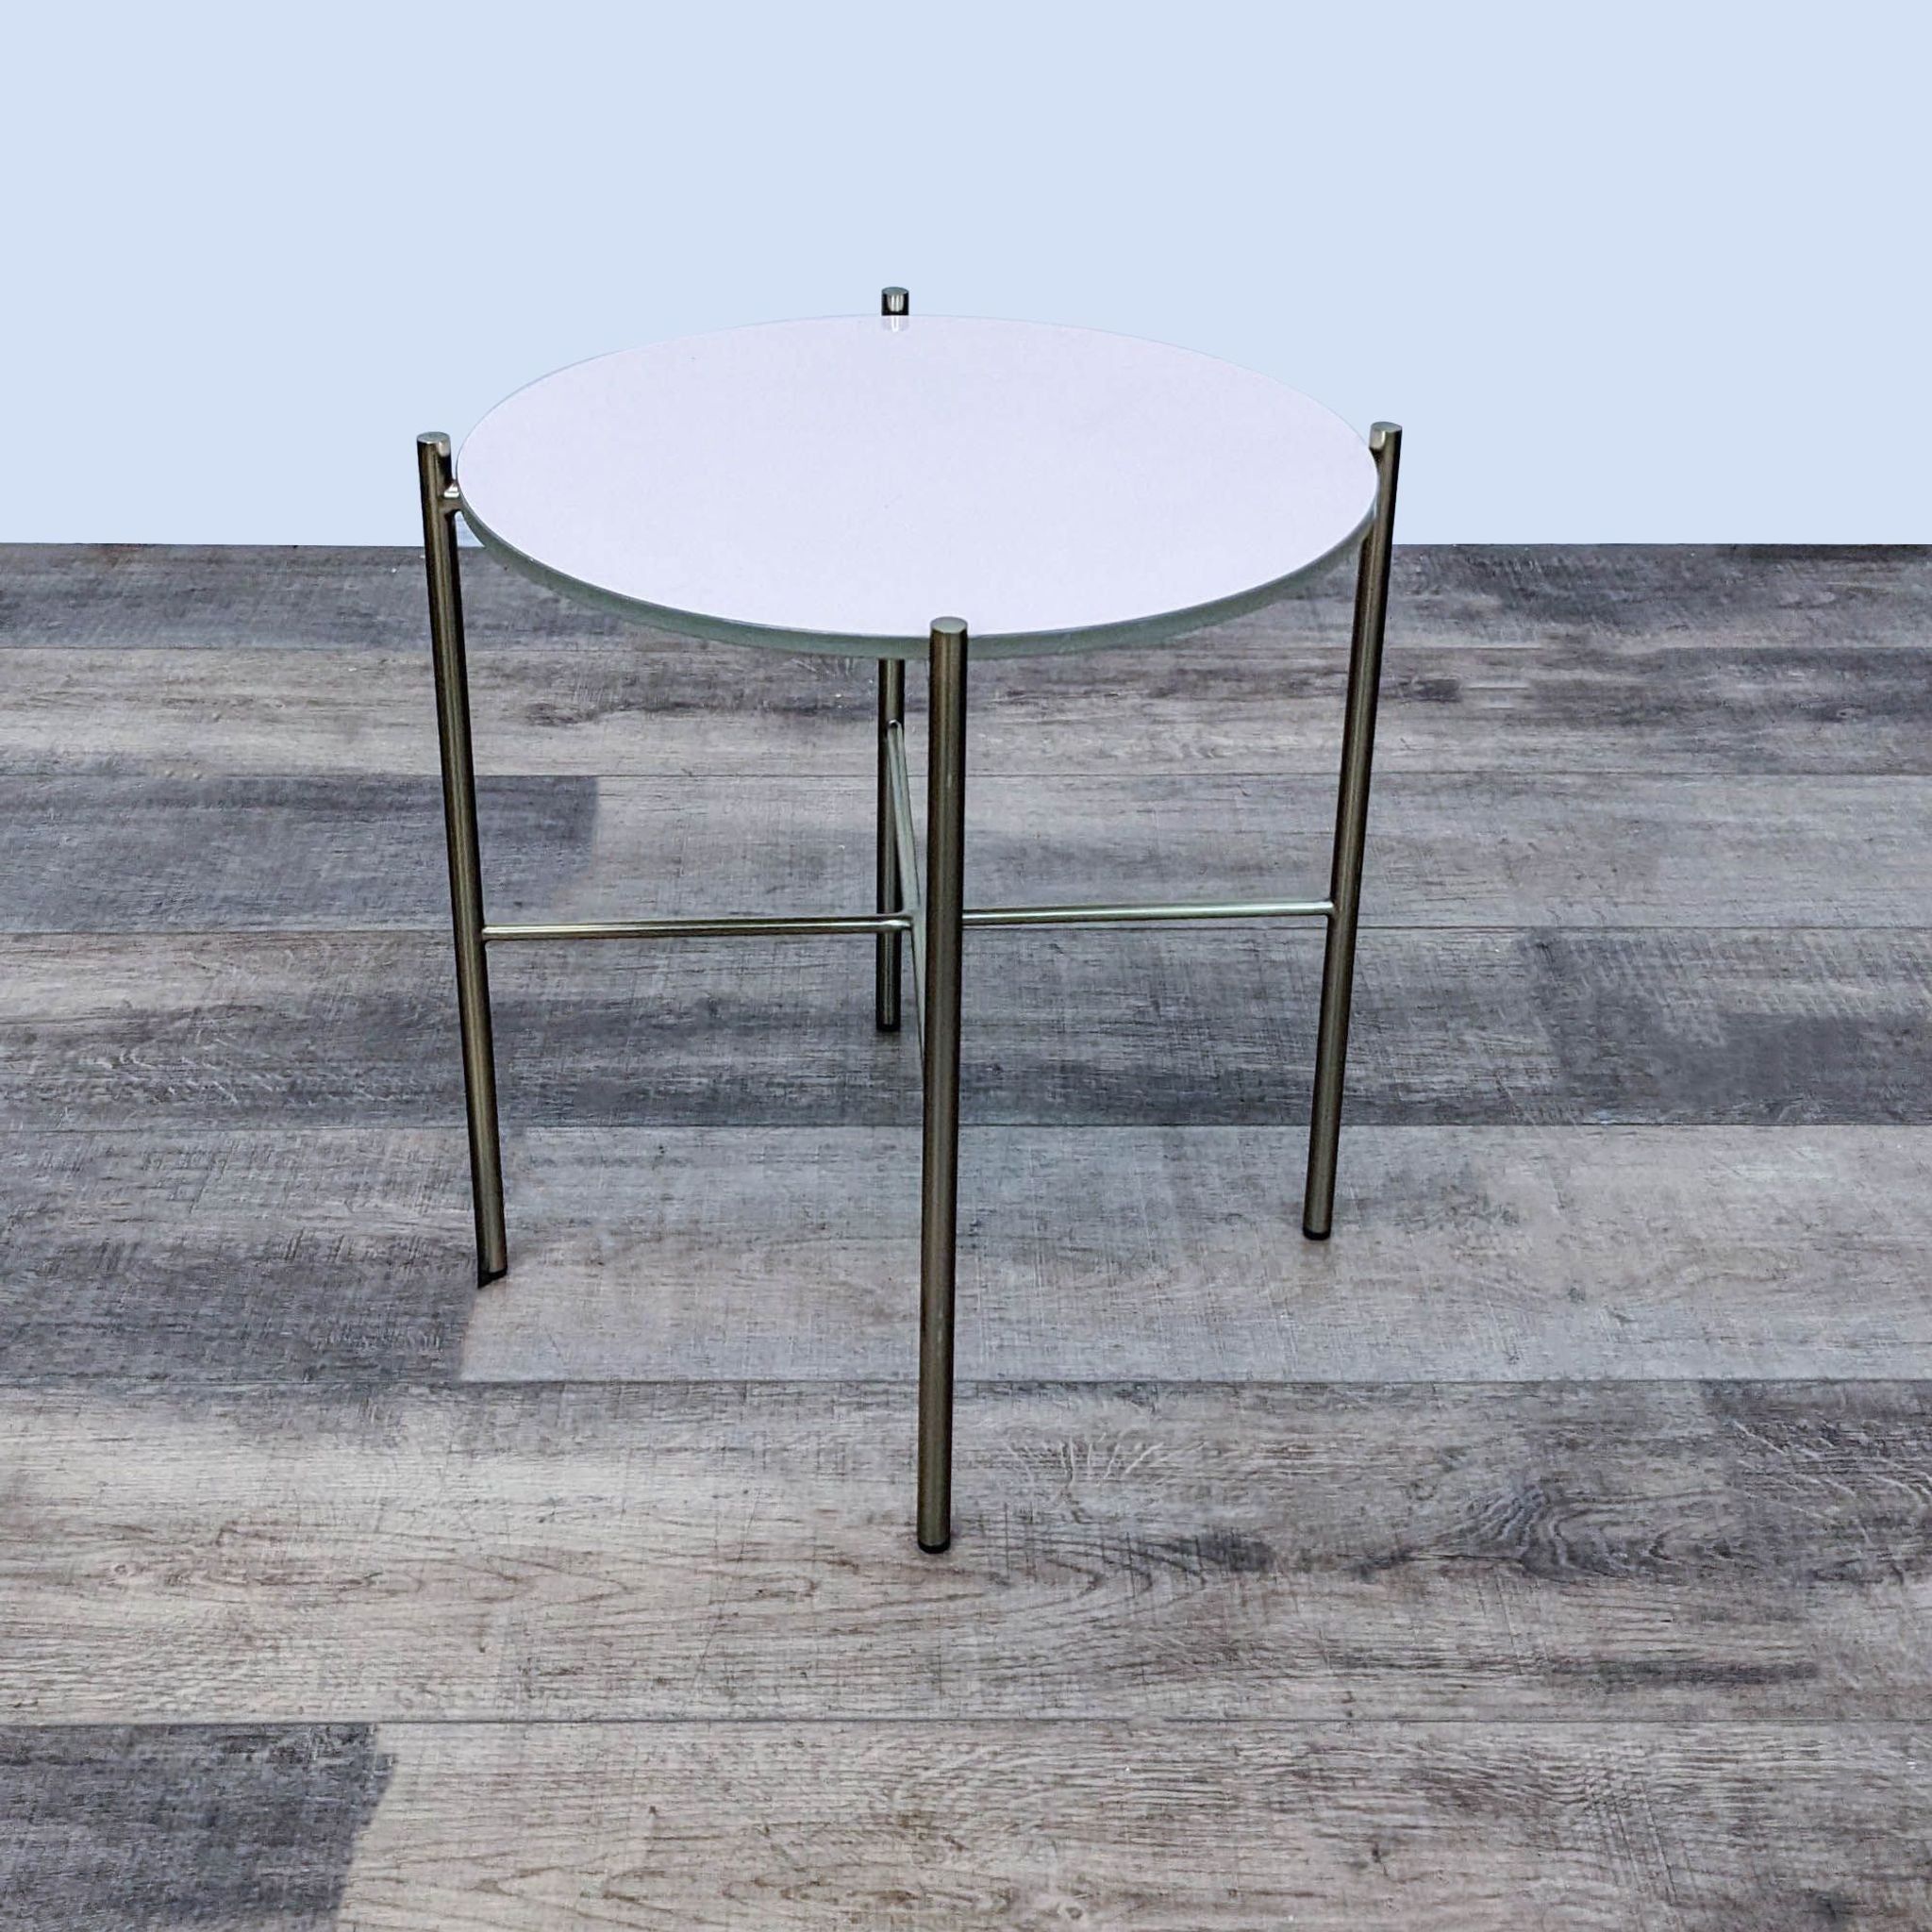 Reperch brand end table with a round opaque glass top on a three-legged metal base, set on a wooden floor.